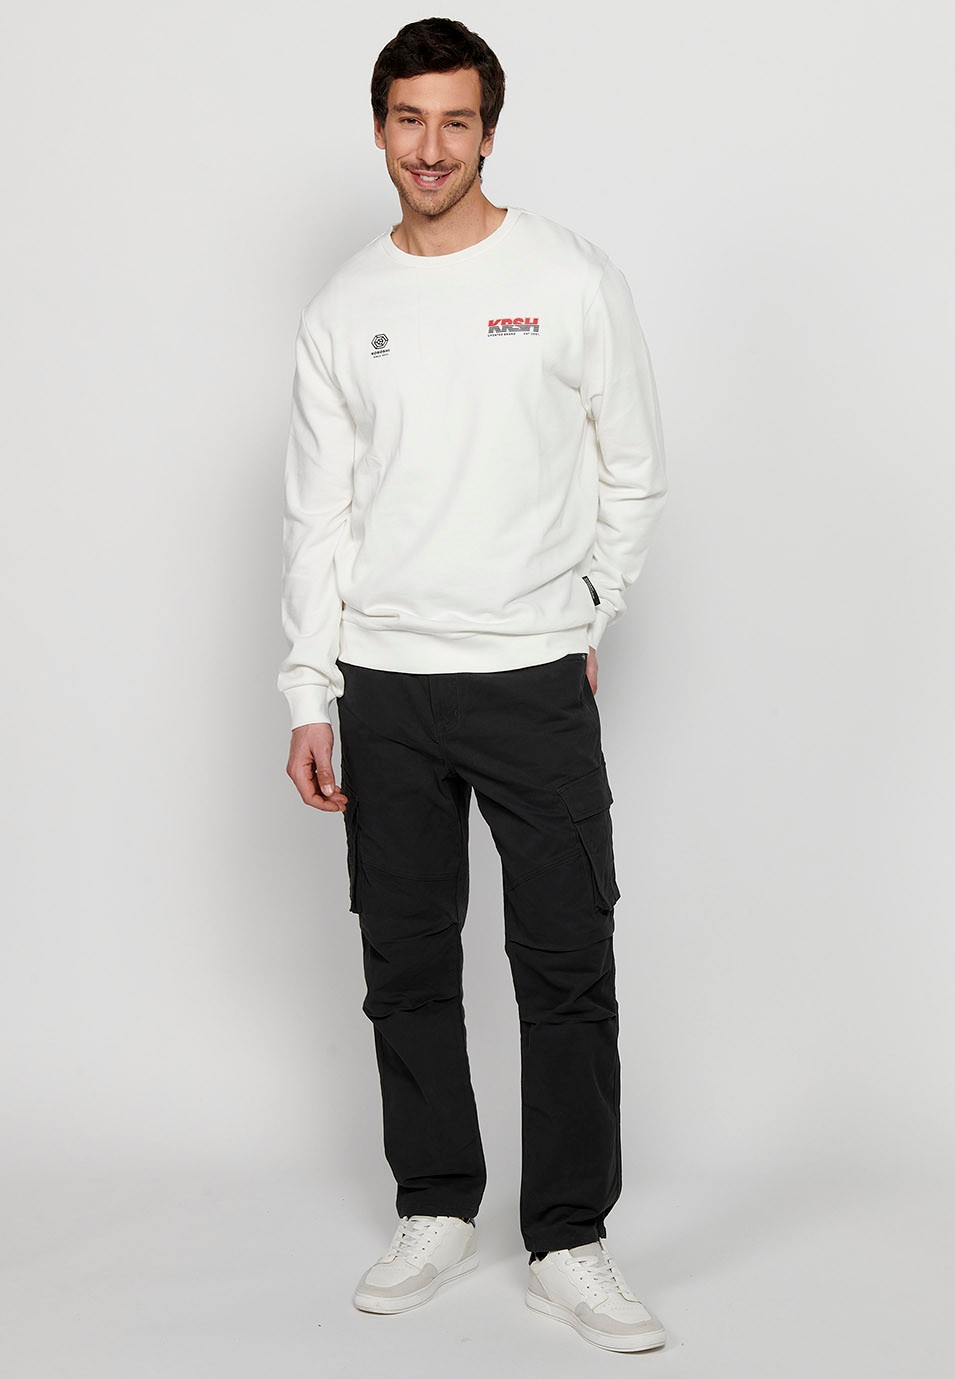 Long-sleeved sweatshirt with round neck and back detail in White for Men 2